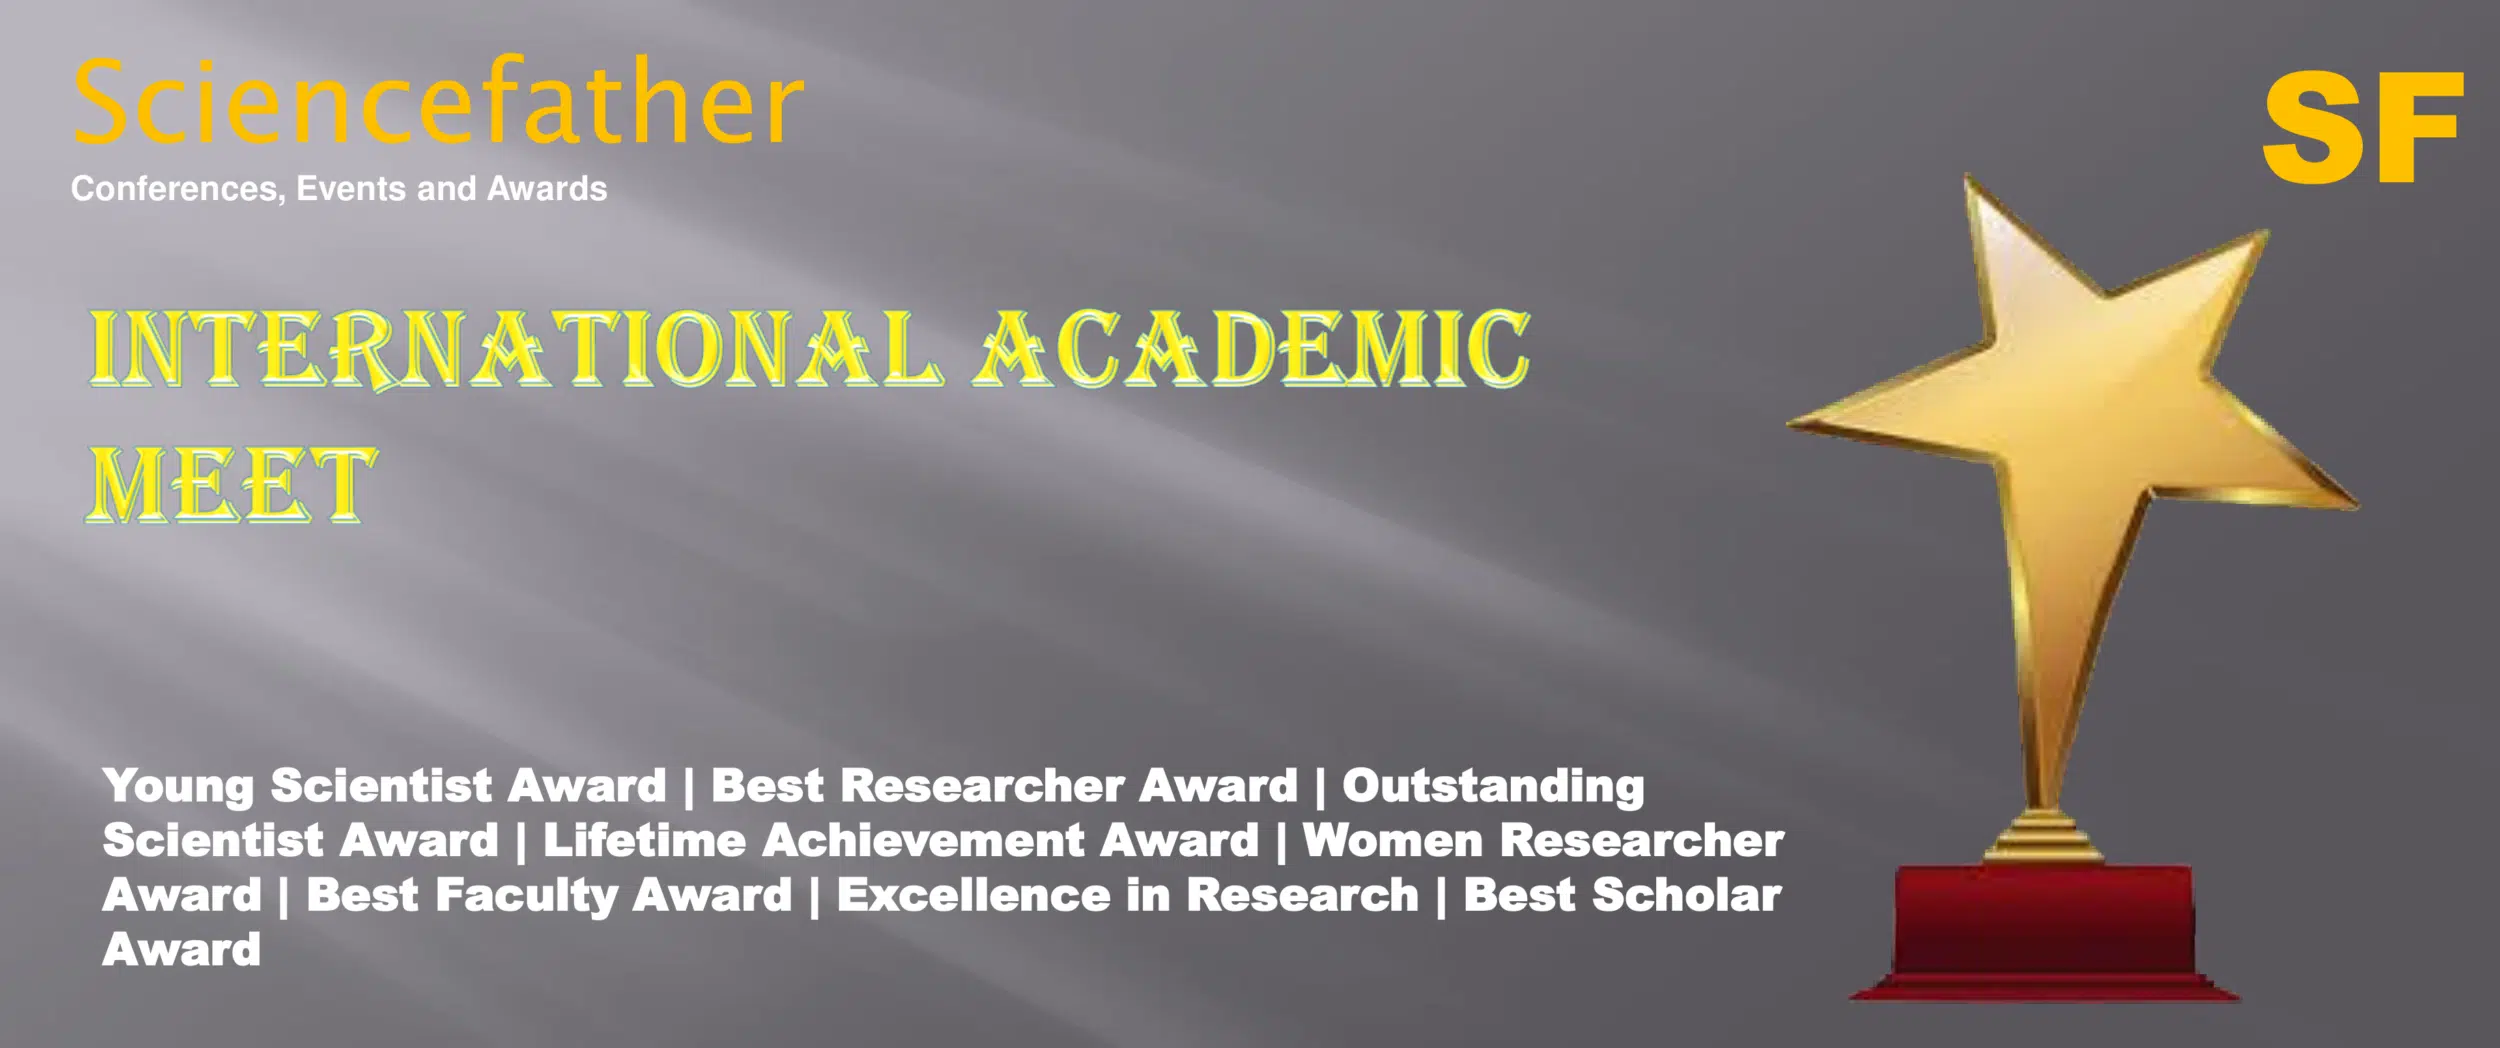 Research　Engineering　Academic　Conferences　2022　Academic　Scientist　Awards　Awards|　2022　Meets　Academic　Events　Conferences　New